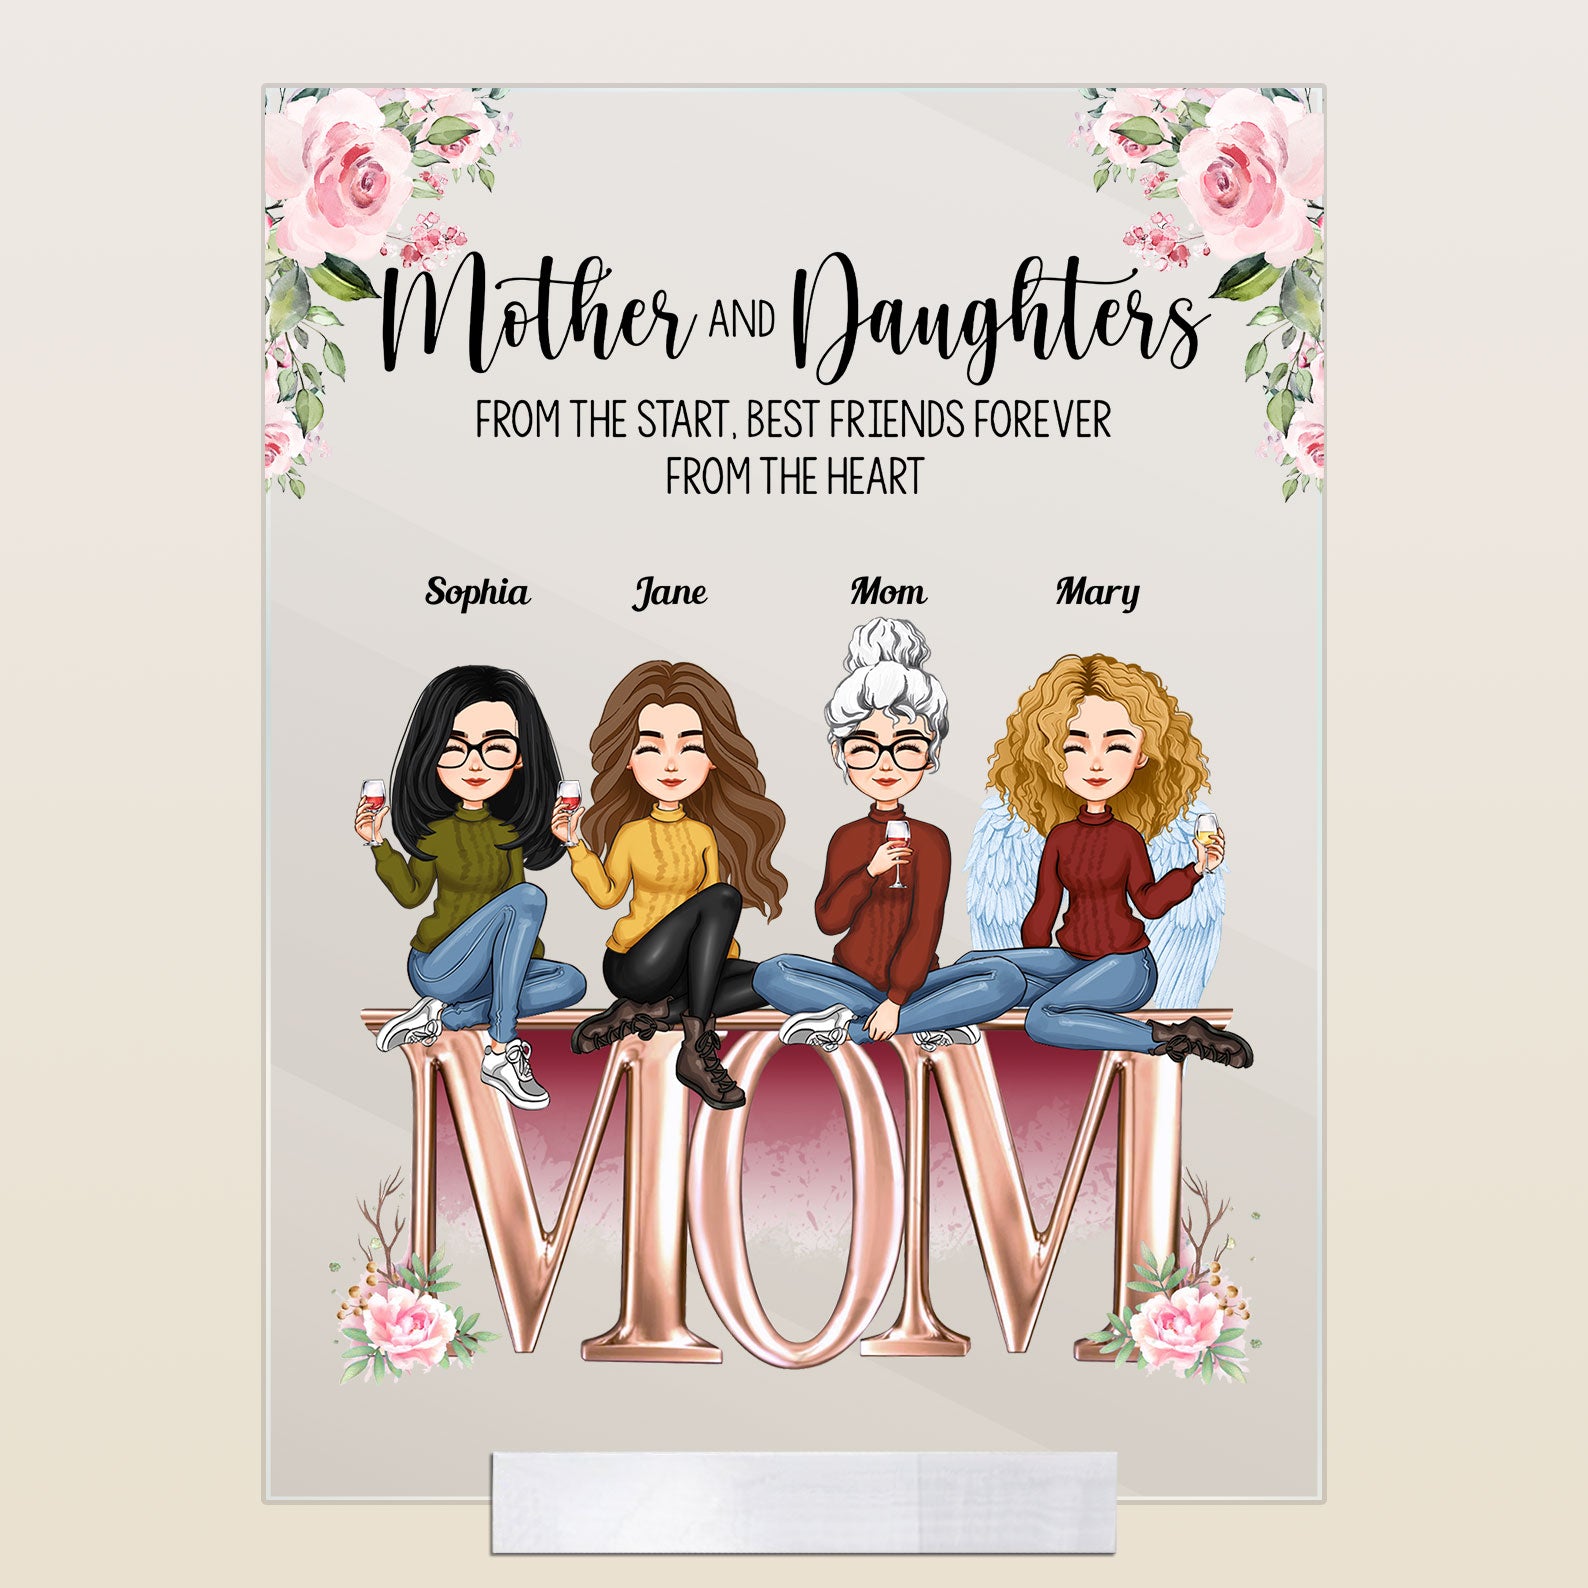  Gifts For Mom, Mom Gifts, Birthday Gifts For Mom, Gifts For Mom  From Daughter, Mom Gifts From Daughters, Mom Birthday Gifts, Best Gifts For  Grandma, Sister, Friends, Valentines Day Gifts For